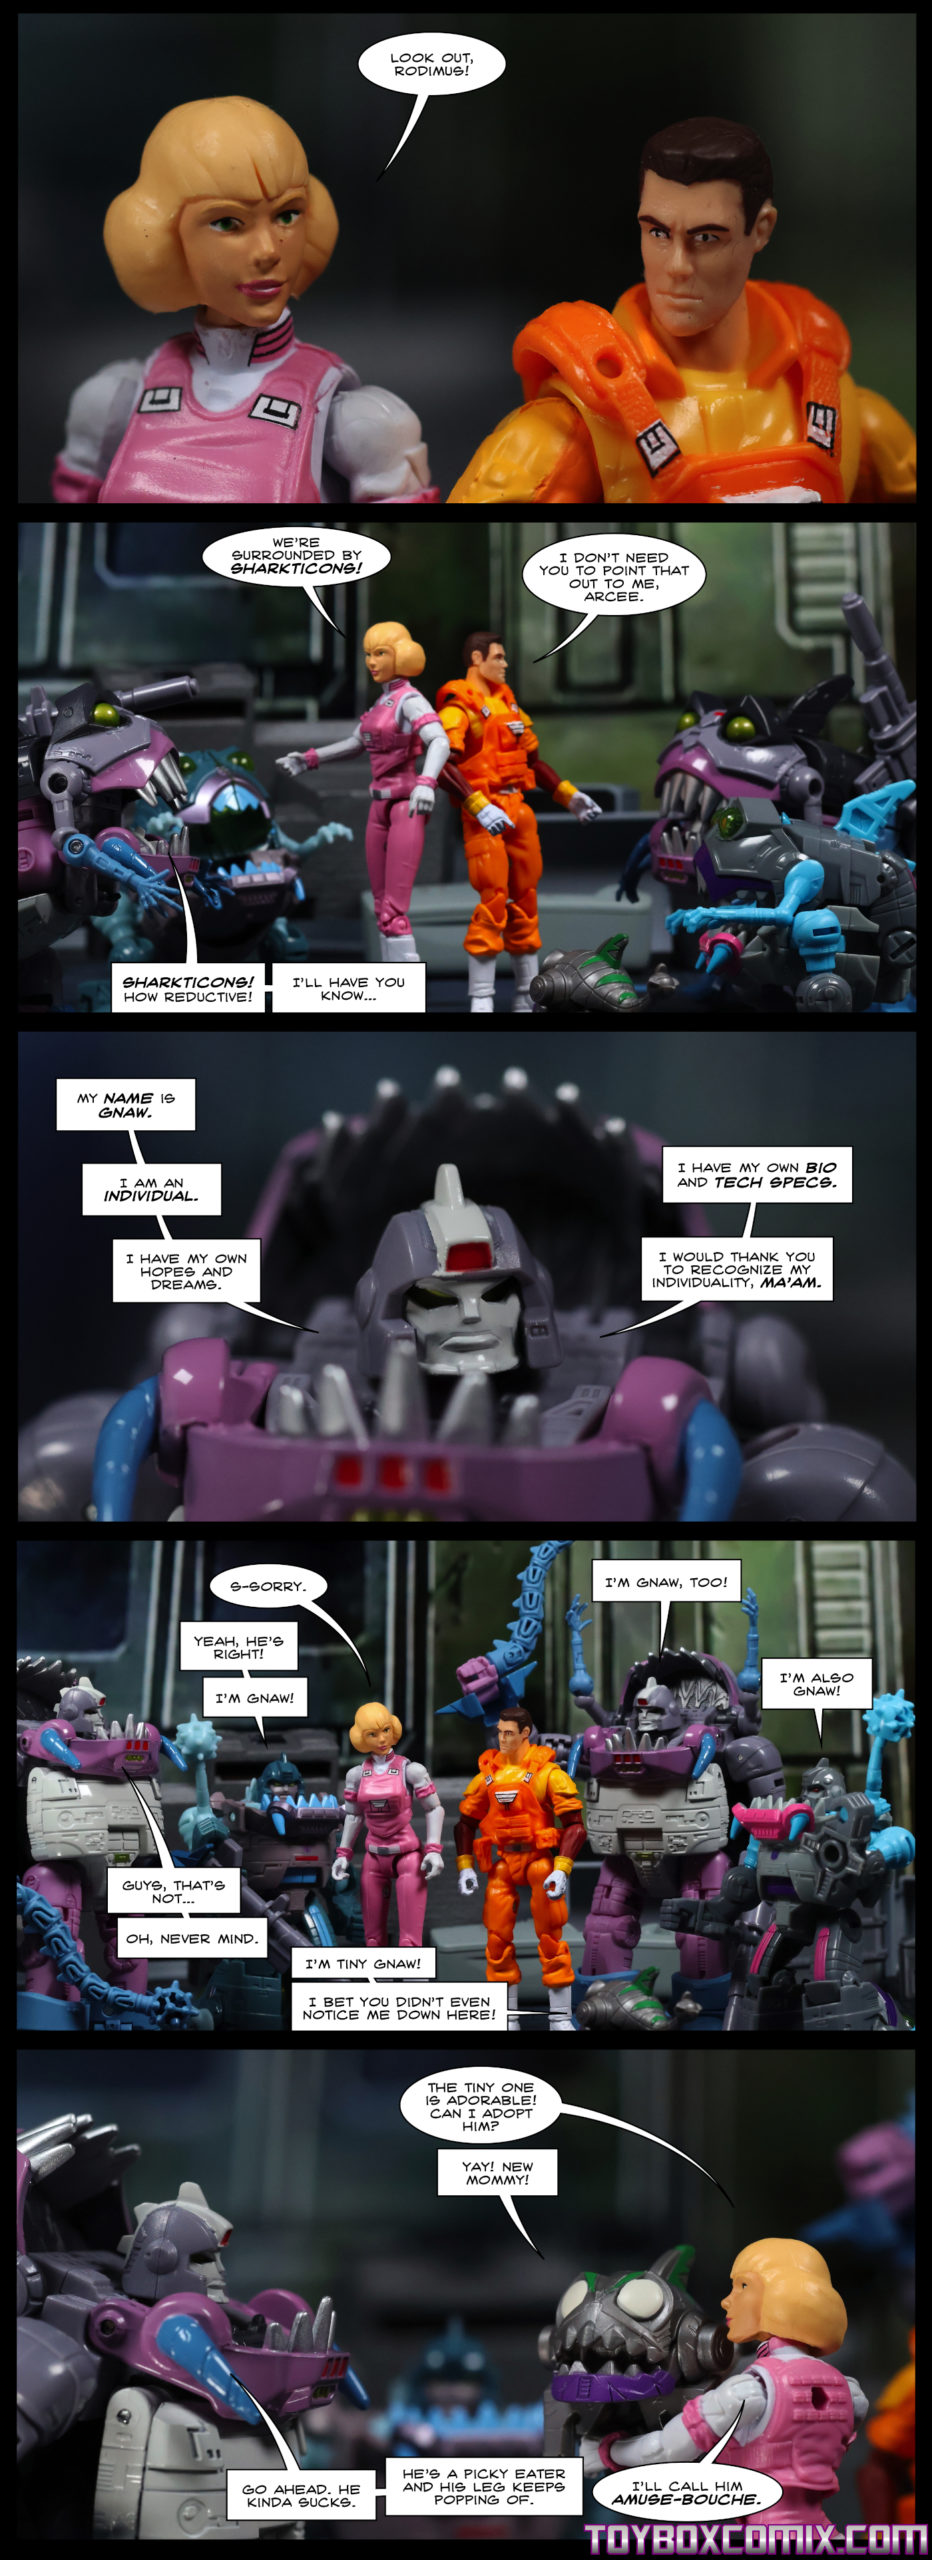 Panel 1: Human Arcee to Human Rodimus: “Look out, Rodimus!” Panel 2: Arcee: “We’re surrounded by Sharkticons!” Rodimus: “I don’t need you to point that out to me, Arcee.” Sharkticons surround human Arcee and Rodimus. A Sharkticon: “Sharkticons! How reductive! I’ll have you know…” Panel 3: The Sharkticon continues: “My name is Gnaw. I am an individual. I have my own hopes and dreams. I have my own bio and tech specs. I would thank you to recognize my individuality, ma’am.” Panel 4: Arcee: “S-sorry.” Another Sharkticon: “Yeah, he’s right! I’m Gnaw!” Another Sharkticon: “I’m Gnaw, too!” Another Sharkticon: “I’m also Gnaw!” First Gnaw: “Guys, that’s not…oh, never mind.” A tiny Sharkticon: “I’m Tiny Gnaw! I bet you didn’t even notice me down here!” Panel 5: Arcee holds up the tiny Sharkticon. Arcee: “The tiny one is adorable! Can I adopt him?” Tiny Sharkticon: “Yay! New mommy!” First Gnaw: “Go ahead. He kinda sucks. He’s a picky eater and his leg keeps popping off.” Arcee: “I’ll call him Amuse-Bouche.”